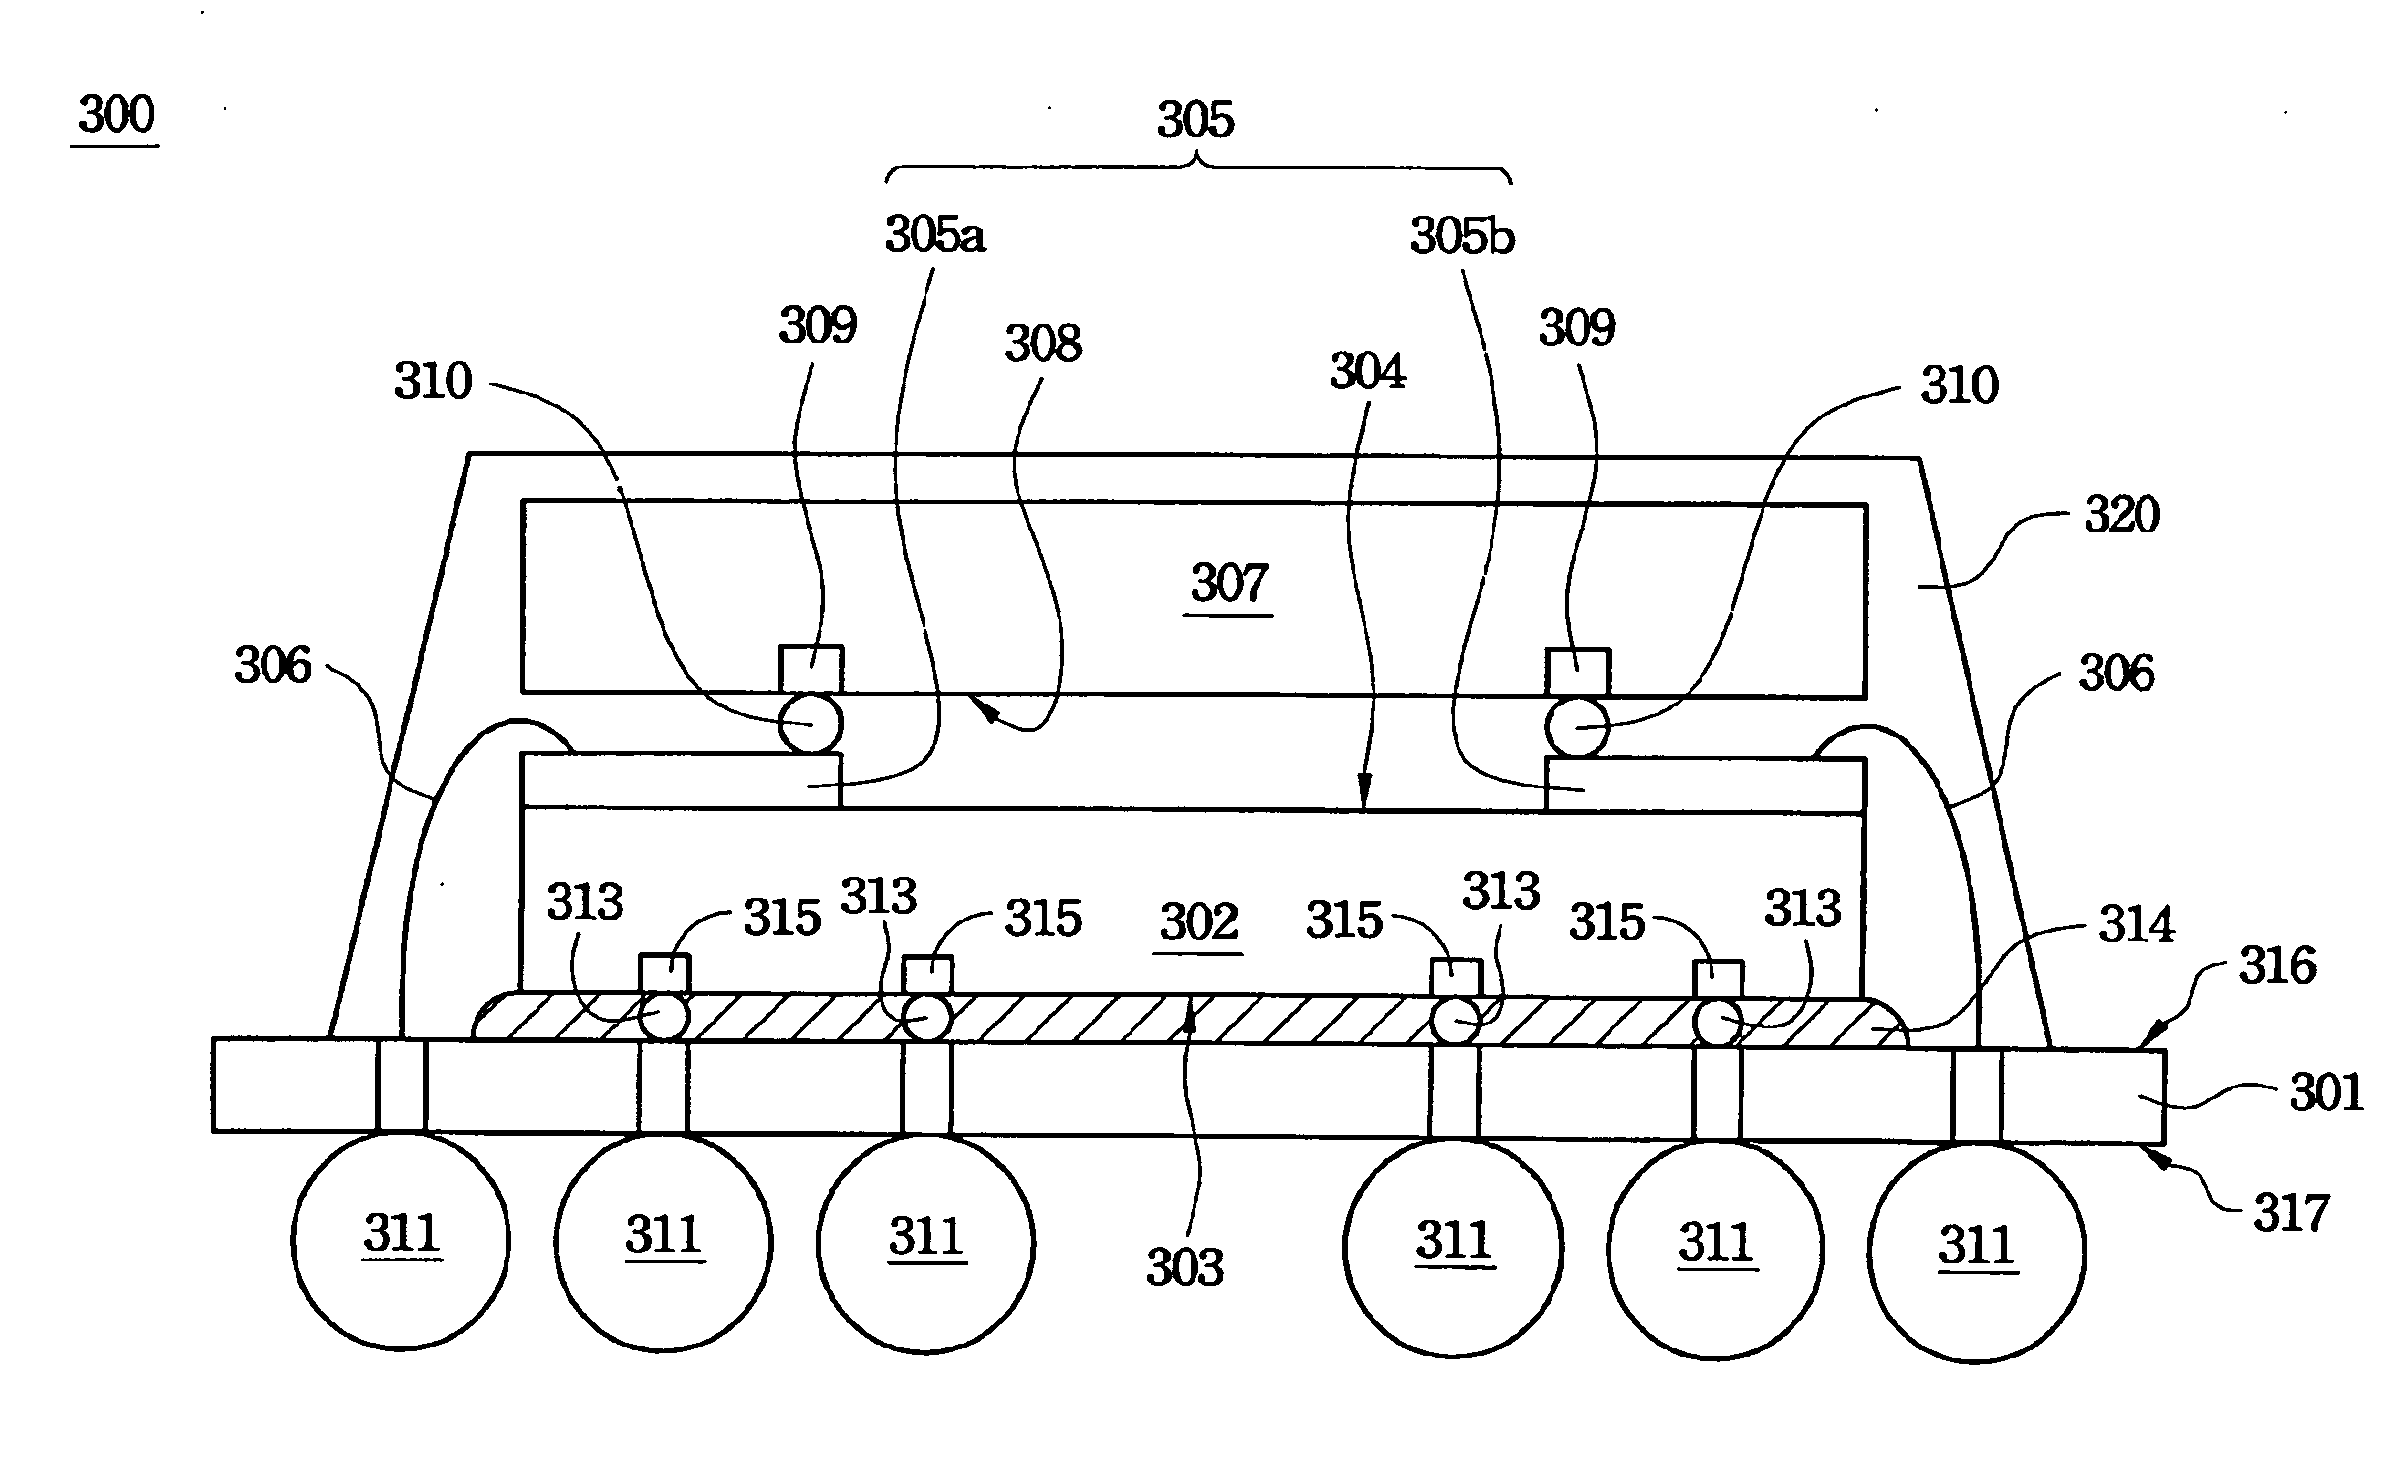 Chip-Stacked Package Structure